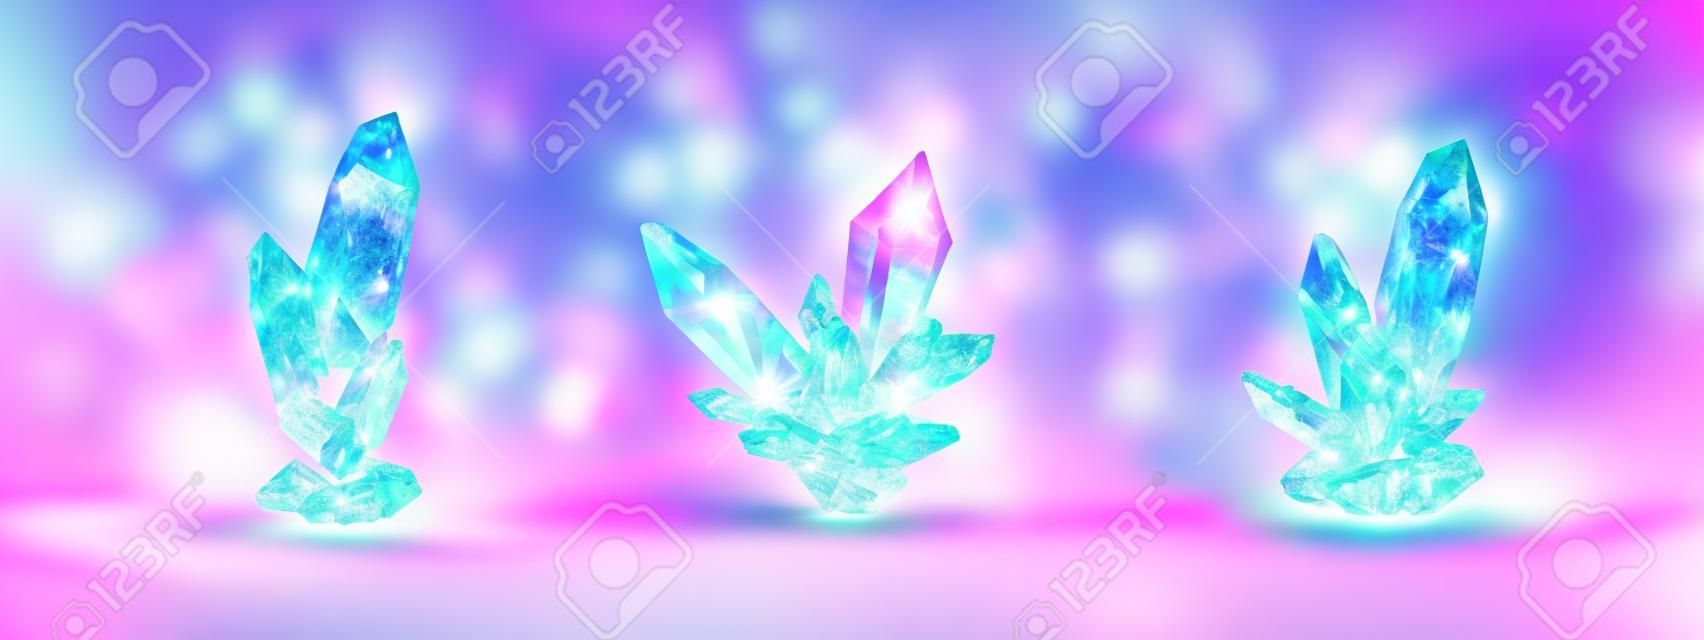 Crystal clusters with pink glowing light aura, quartz or crystalline mineral. Unfaceted rough glowing rocks stalagmites, isolated jewelry precious or semiprecious gem stones, Realistic 3d vector set